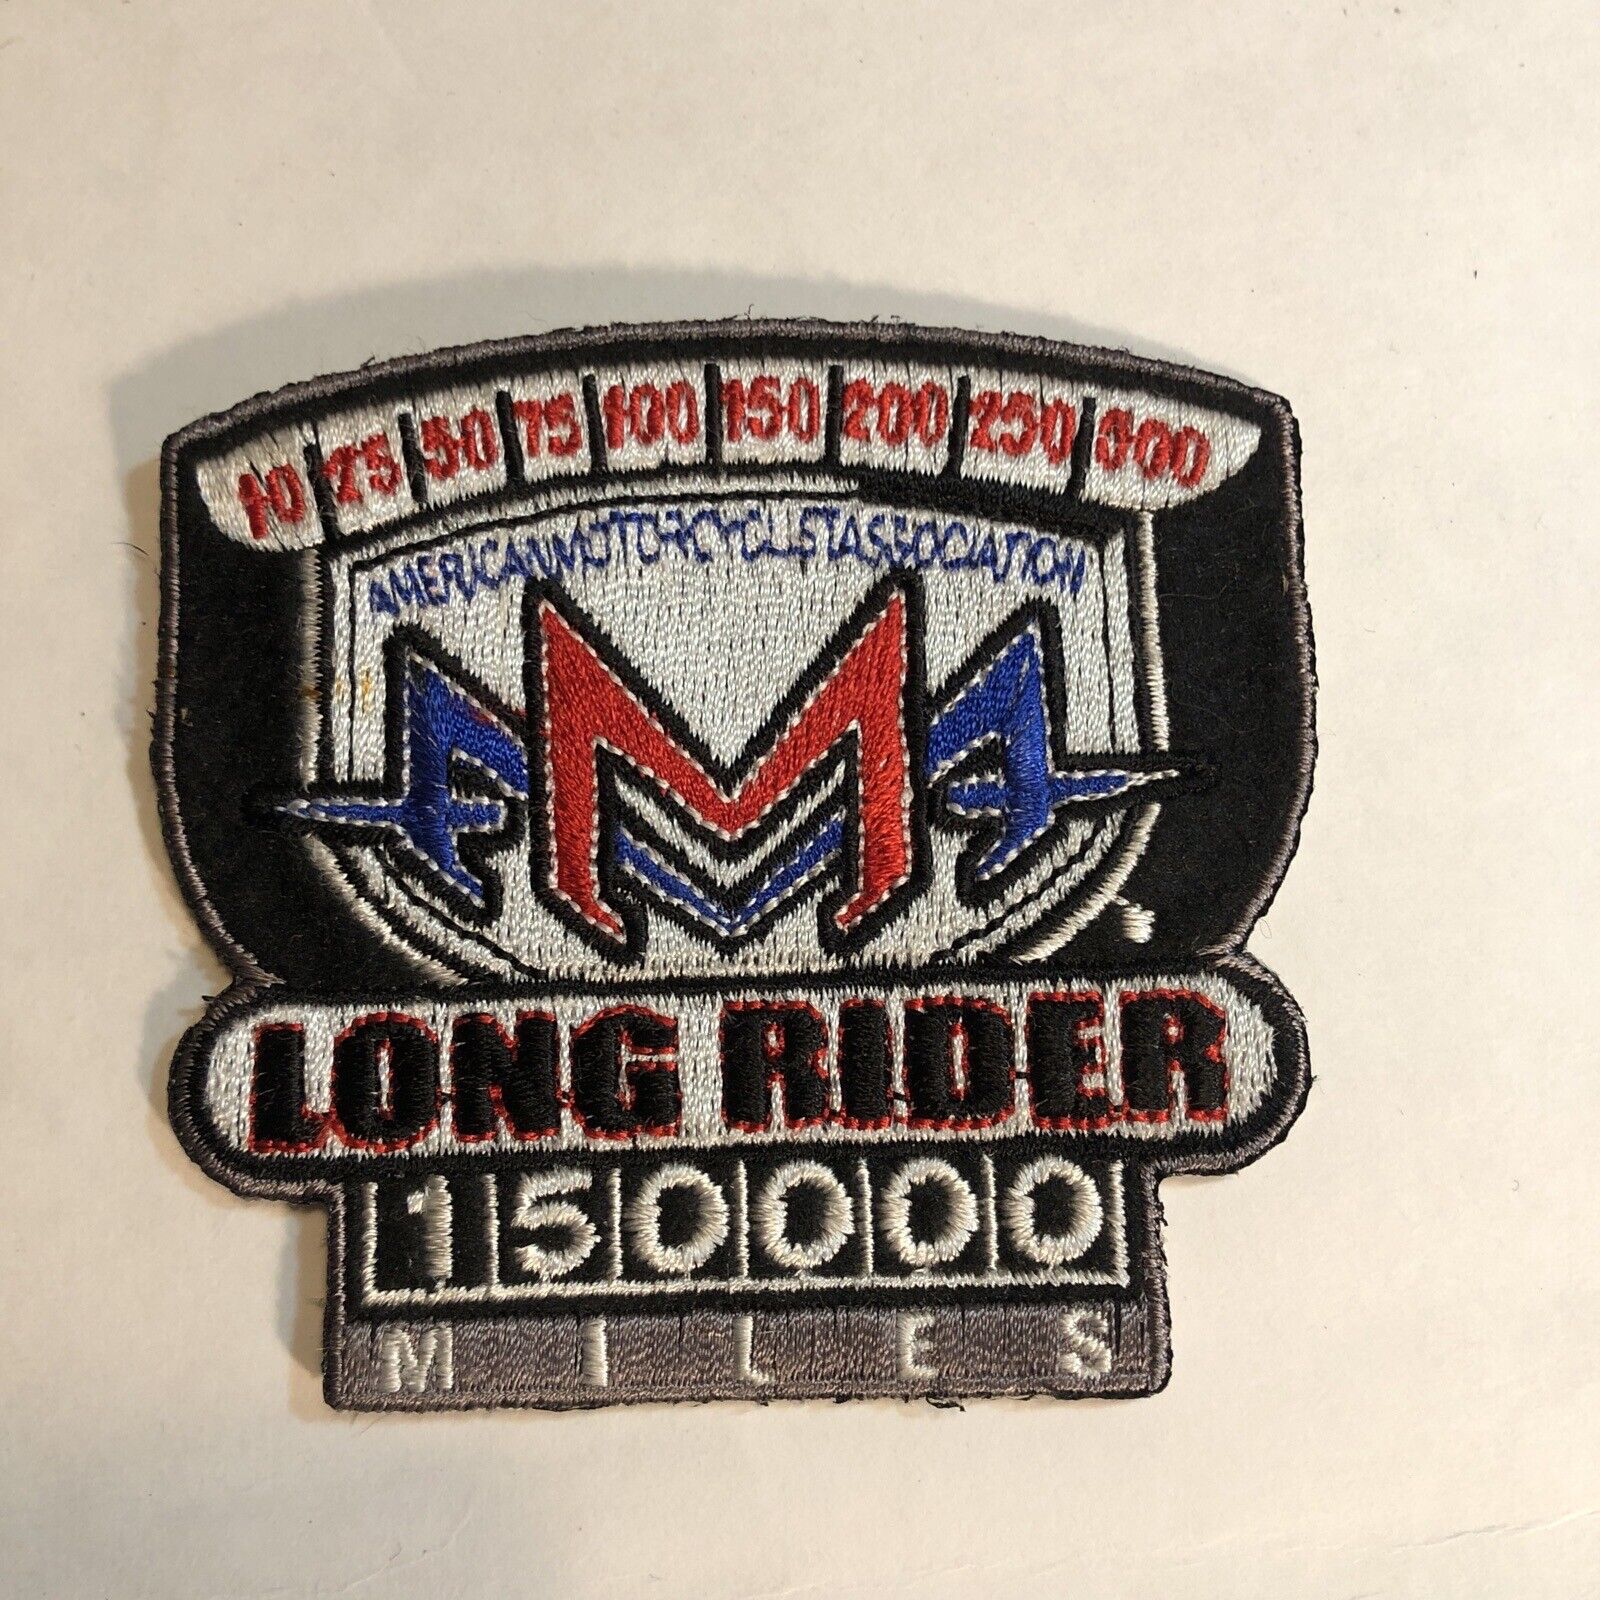 AMA American Motorcyclist Patch Long Rider 150,000 Miles 3 Inches by 3 1/4 NEW